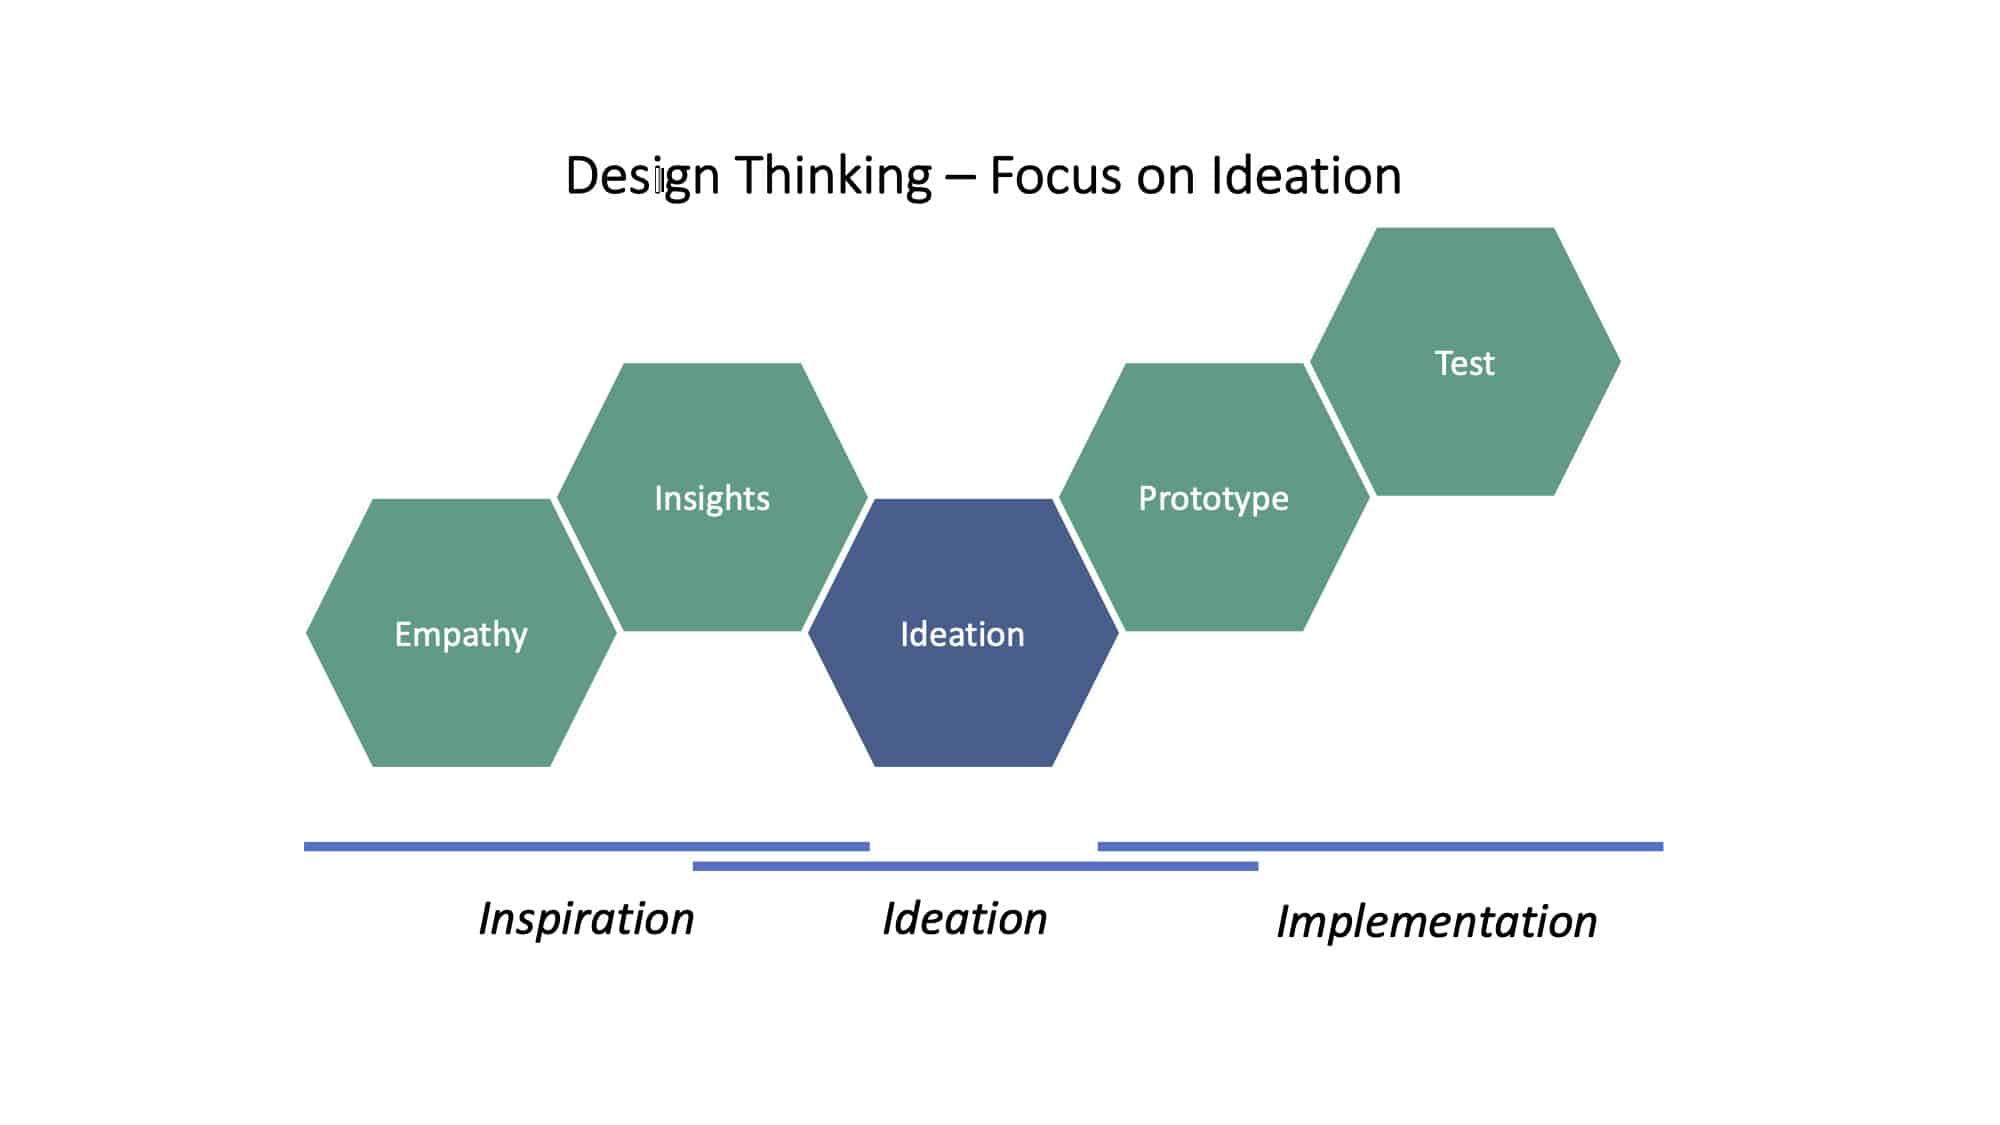 What is Design Thinking?